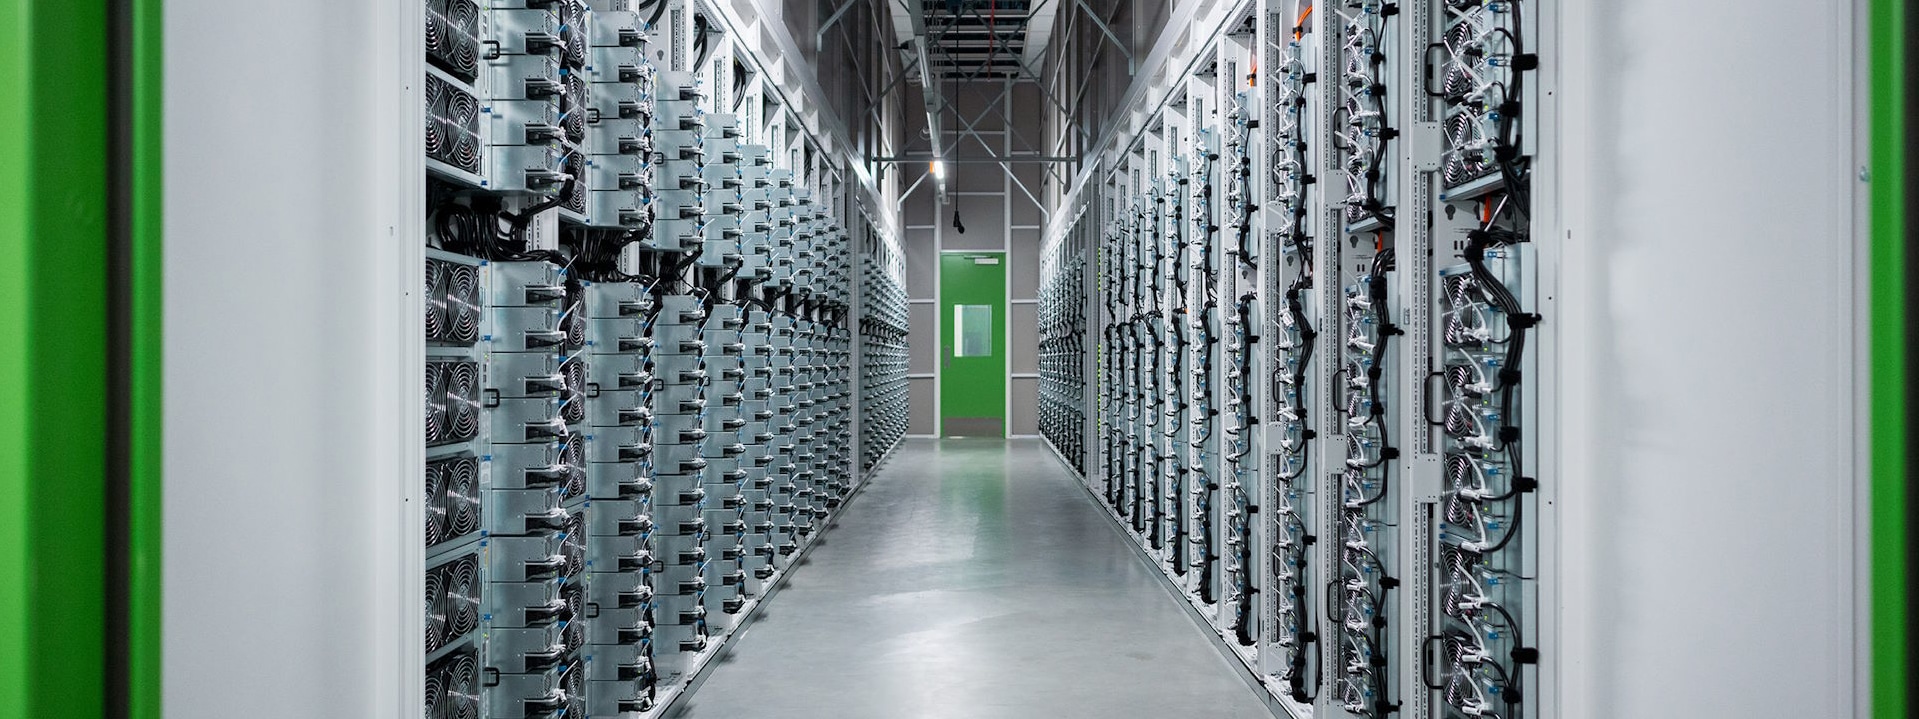 A view looking down an aisle of server banks.